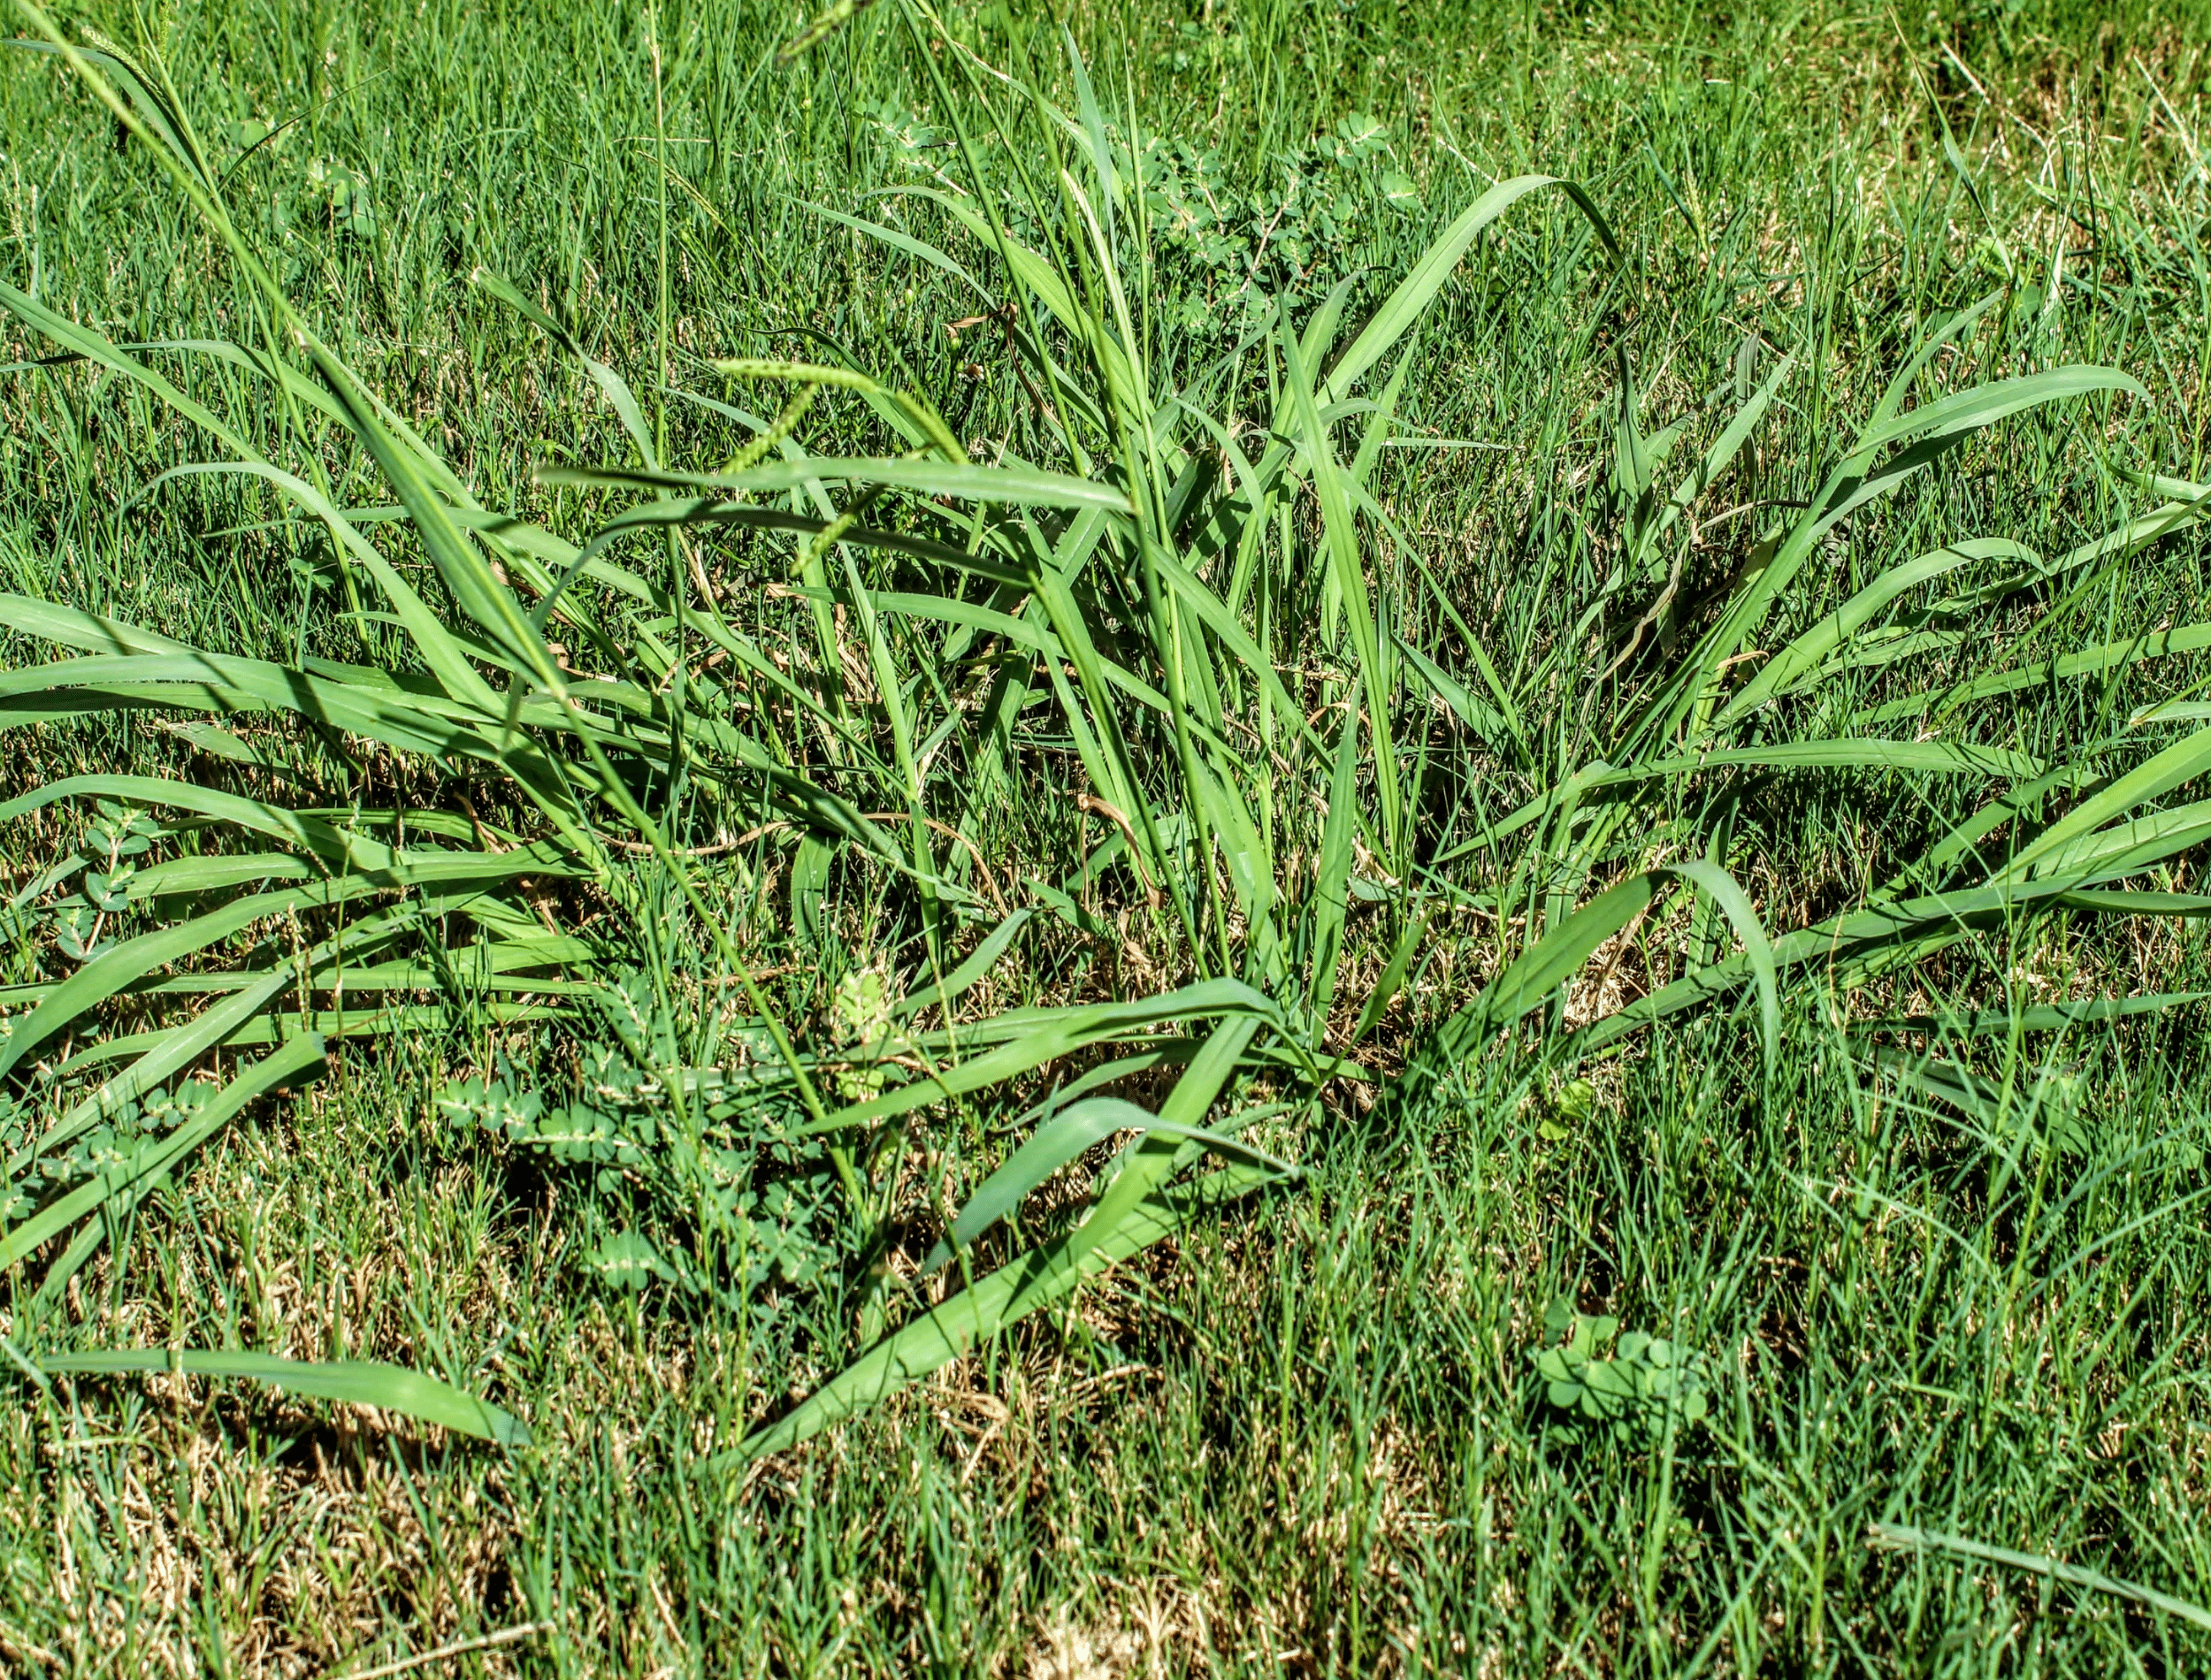 Lawn taken over by Crabgrass